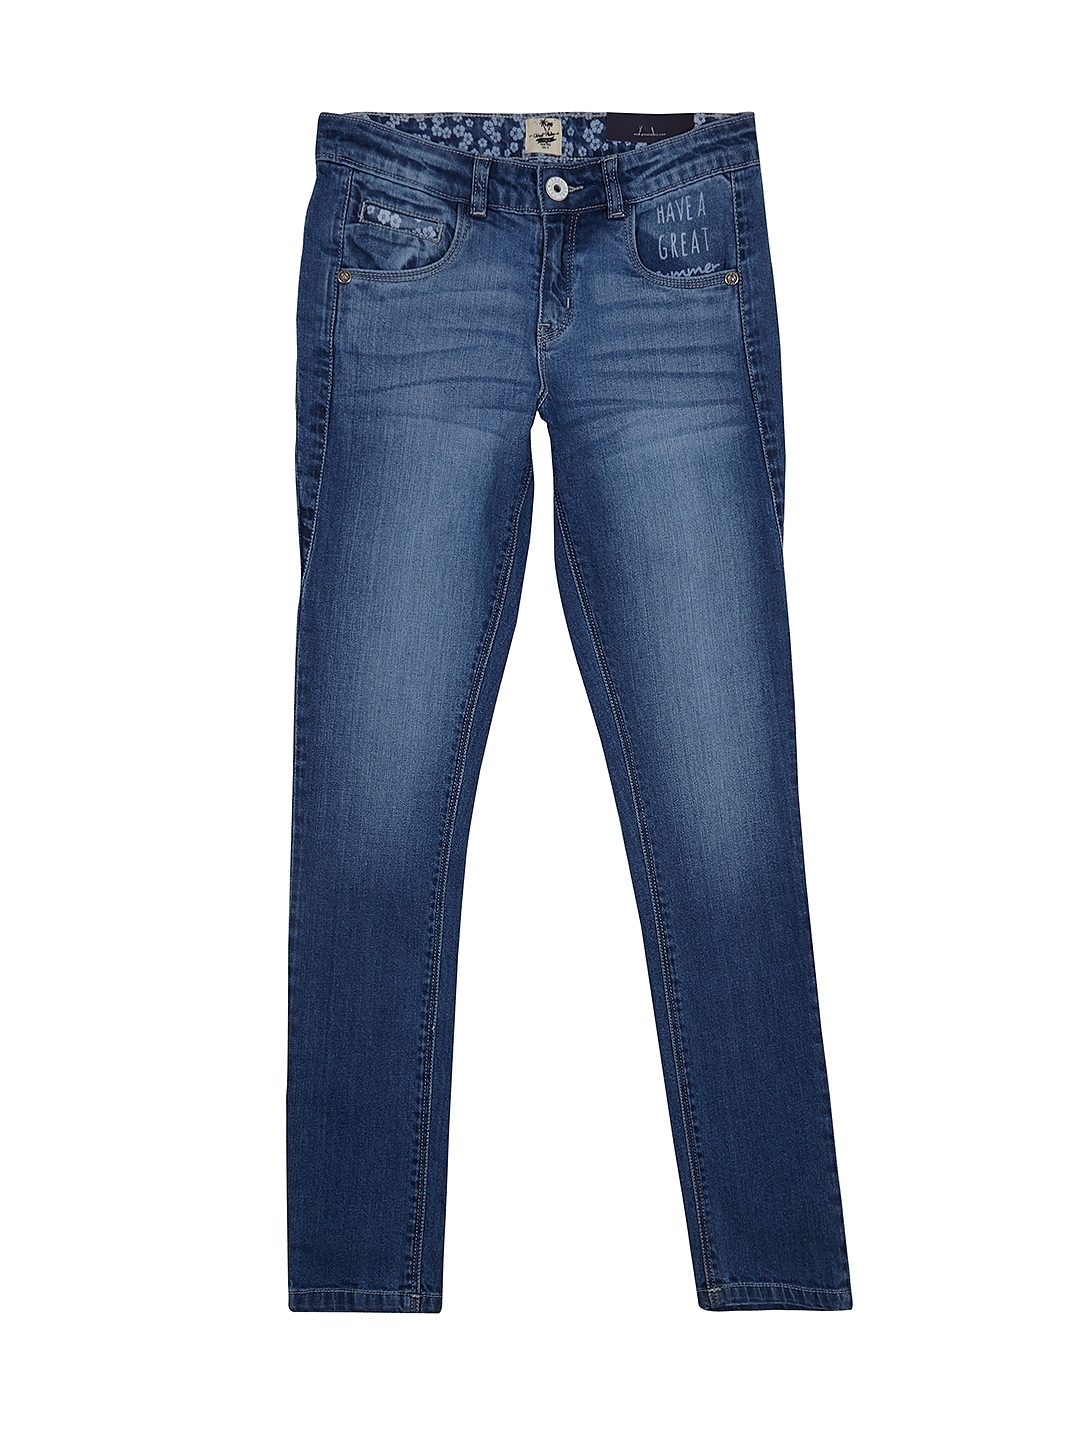 Buy Palm Tree Girls Blue Jeans - Jeans for Girls 1869523 | Myntra